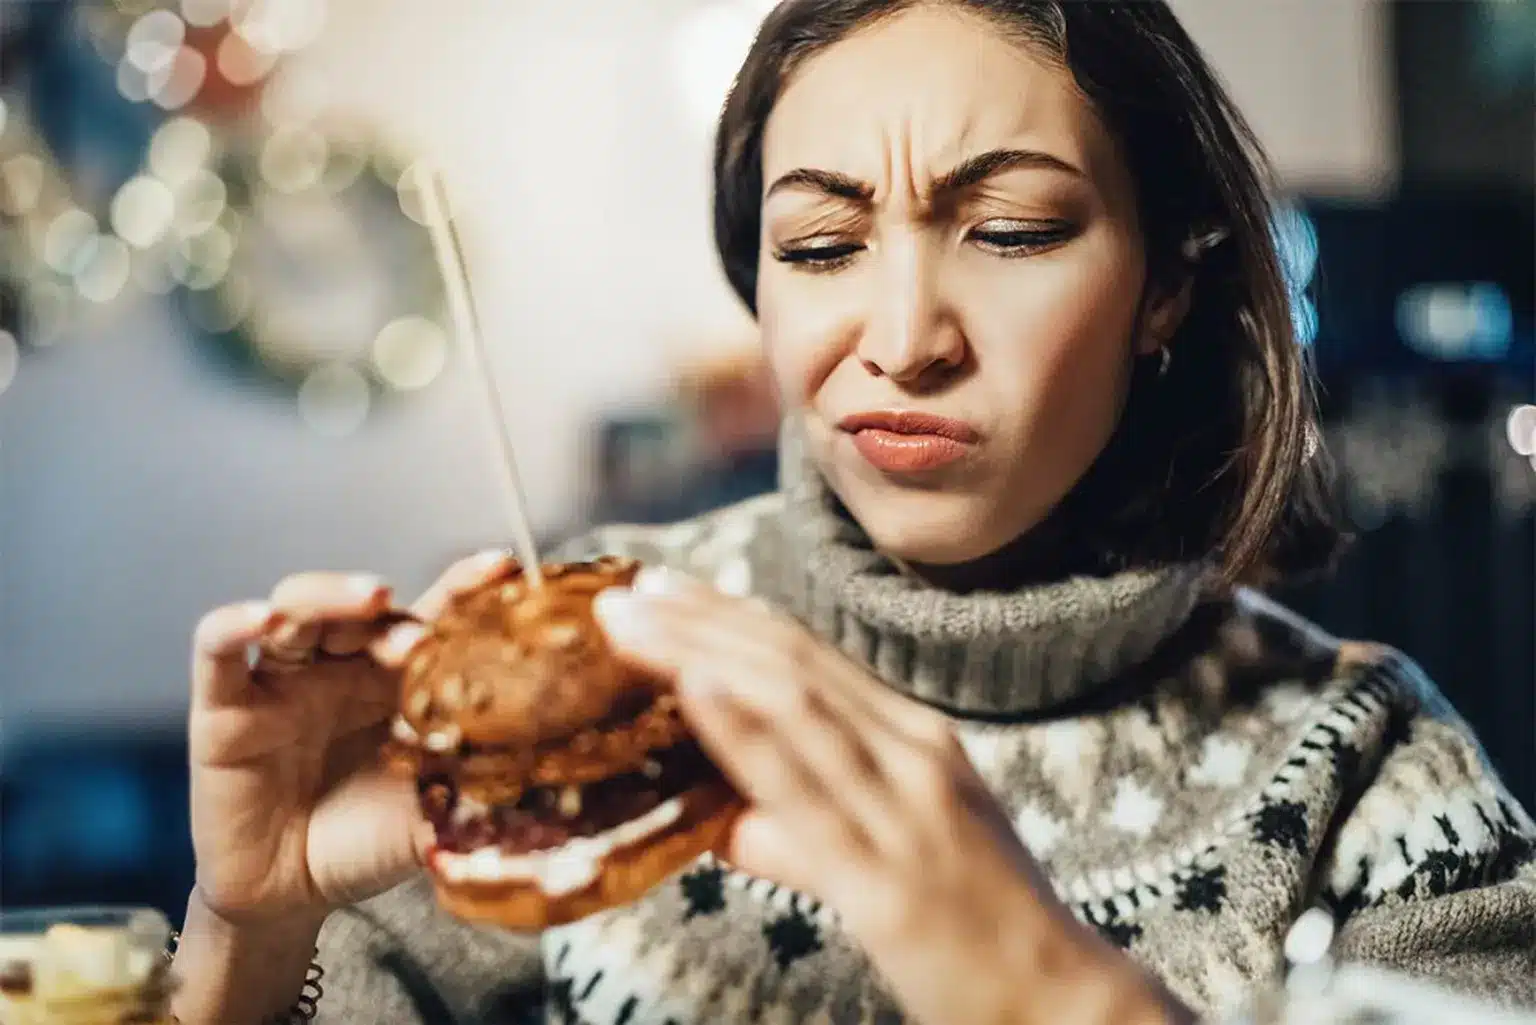 How to Stop Craving Junk Food